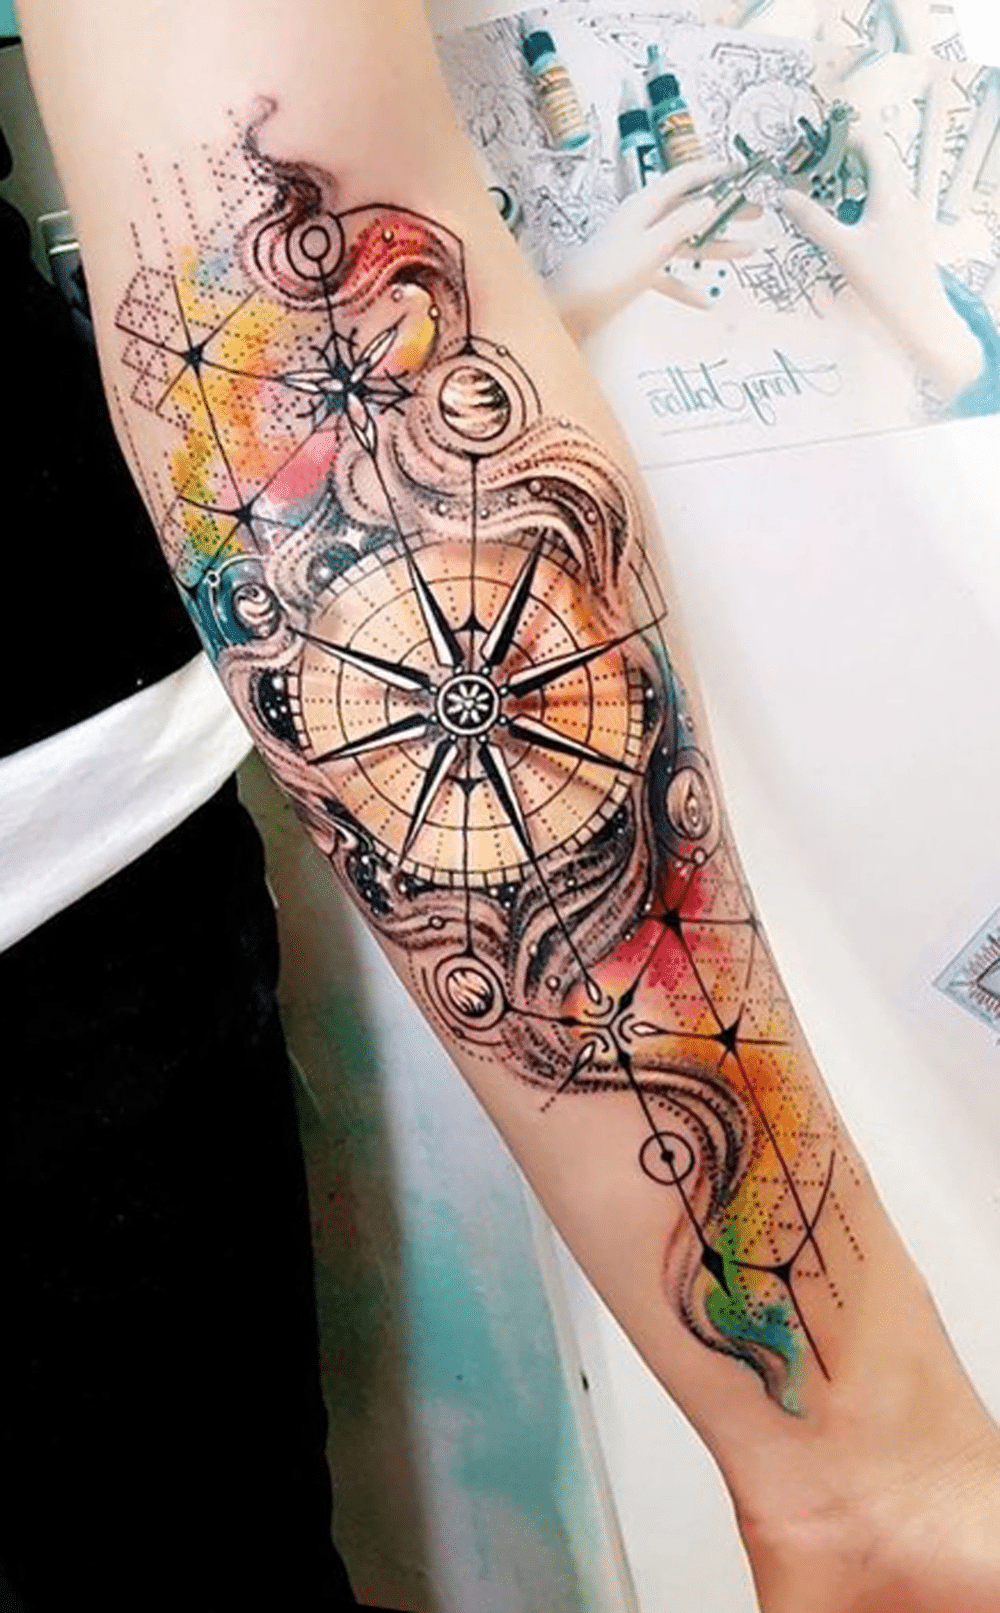 Inner forearm tattoo placement ideas for women